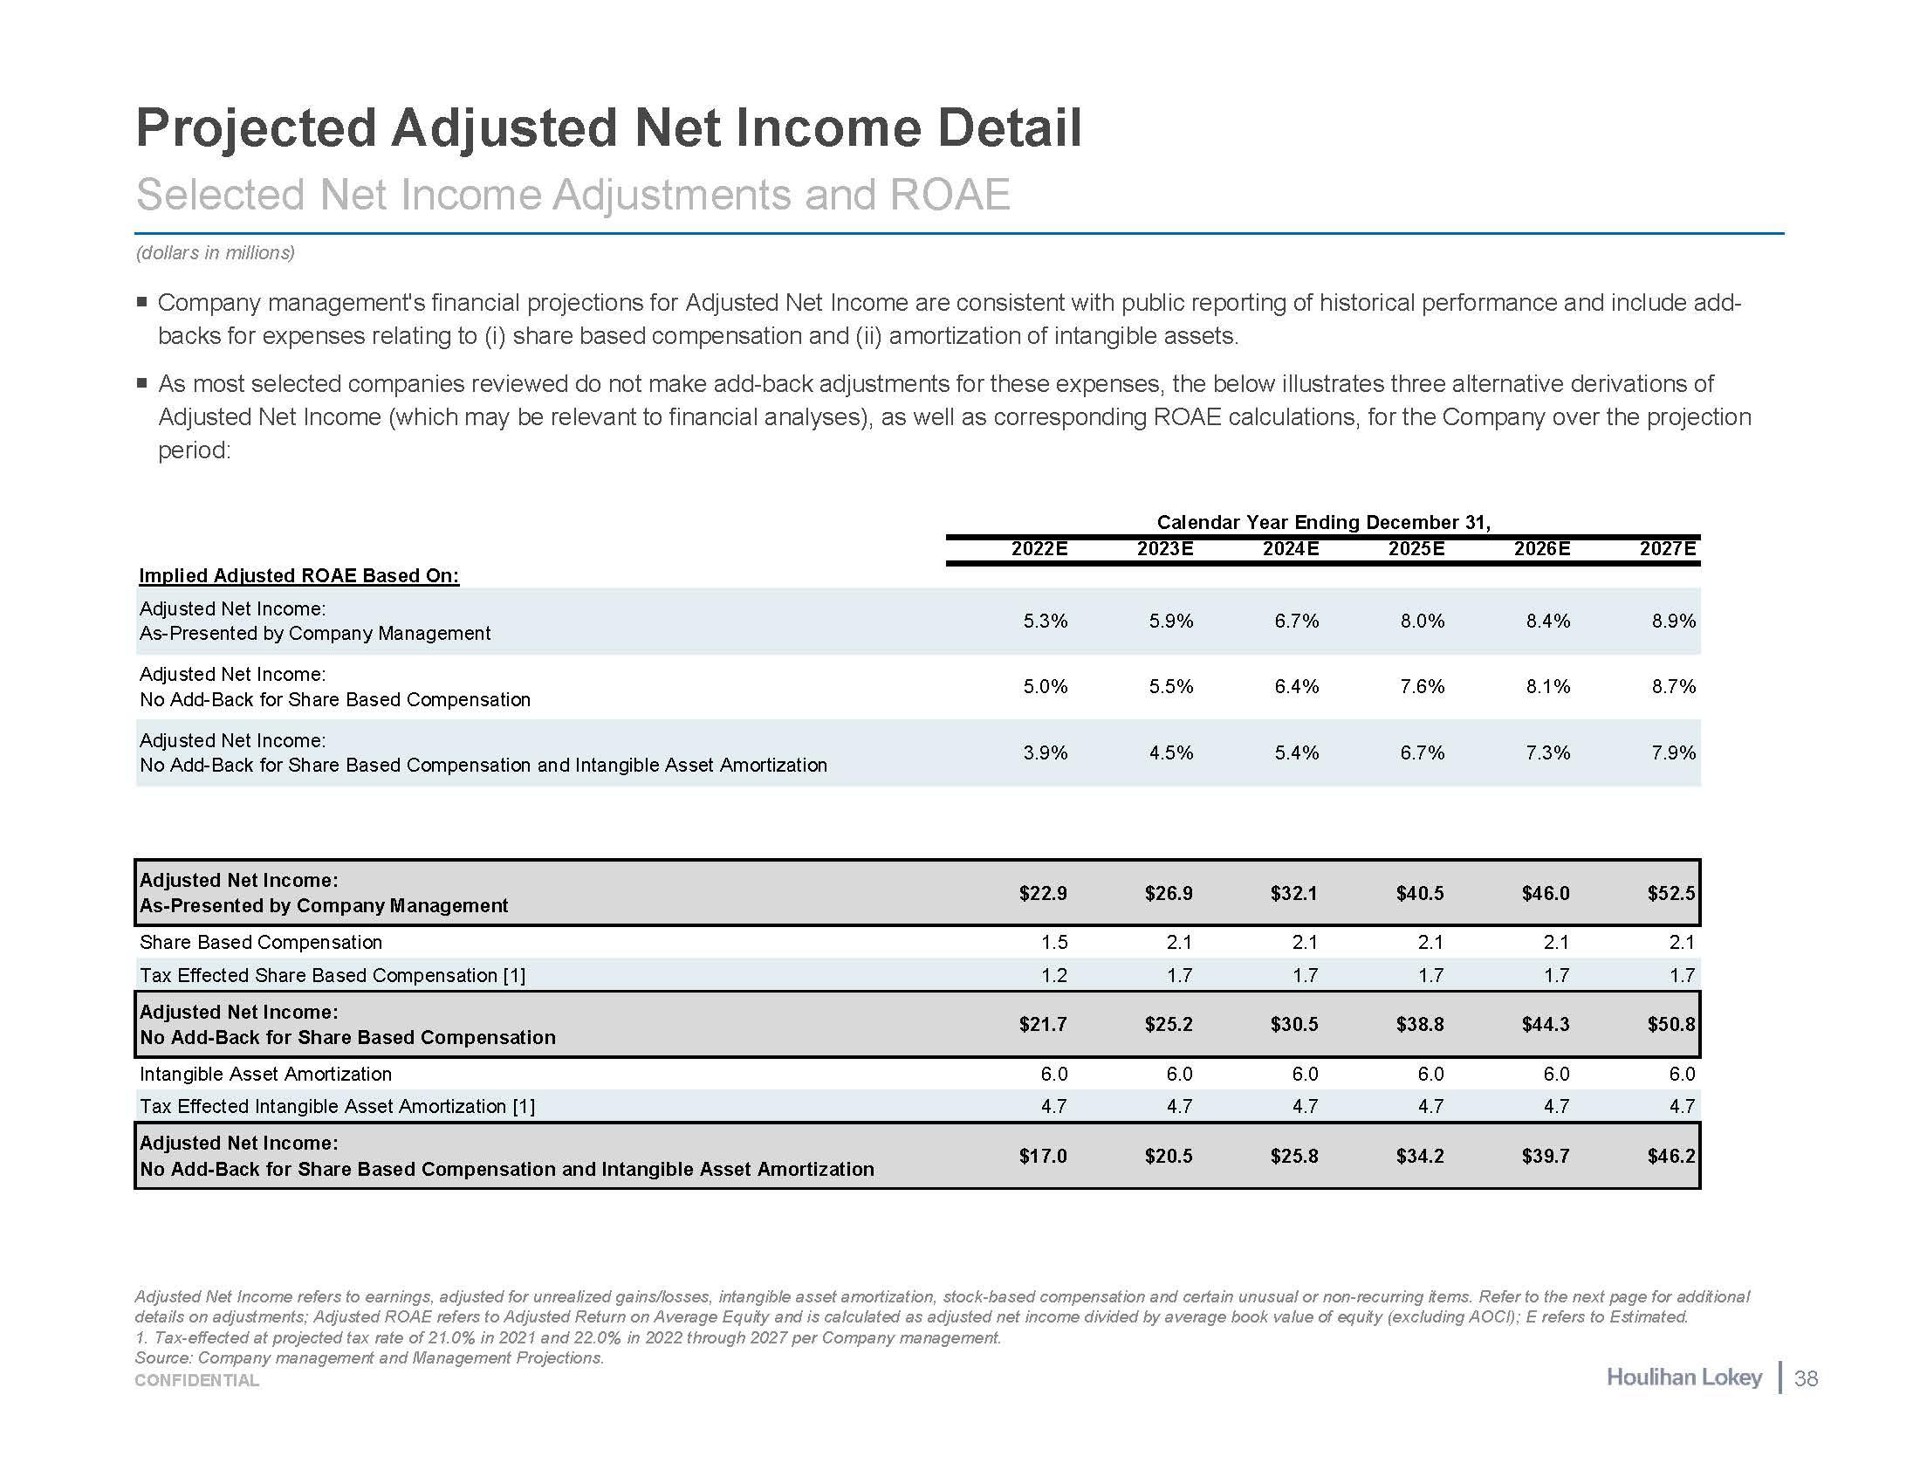 projected adjusted net income detail | Houlihan Lokey